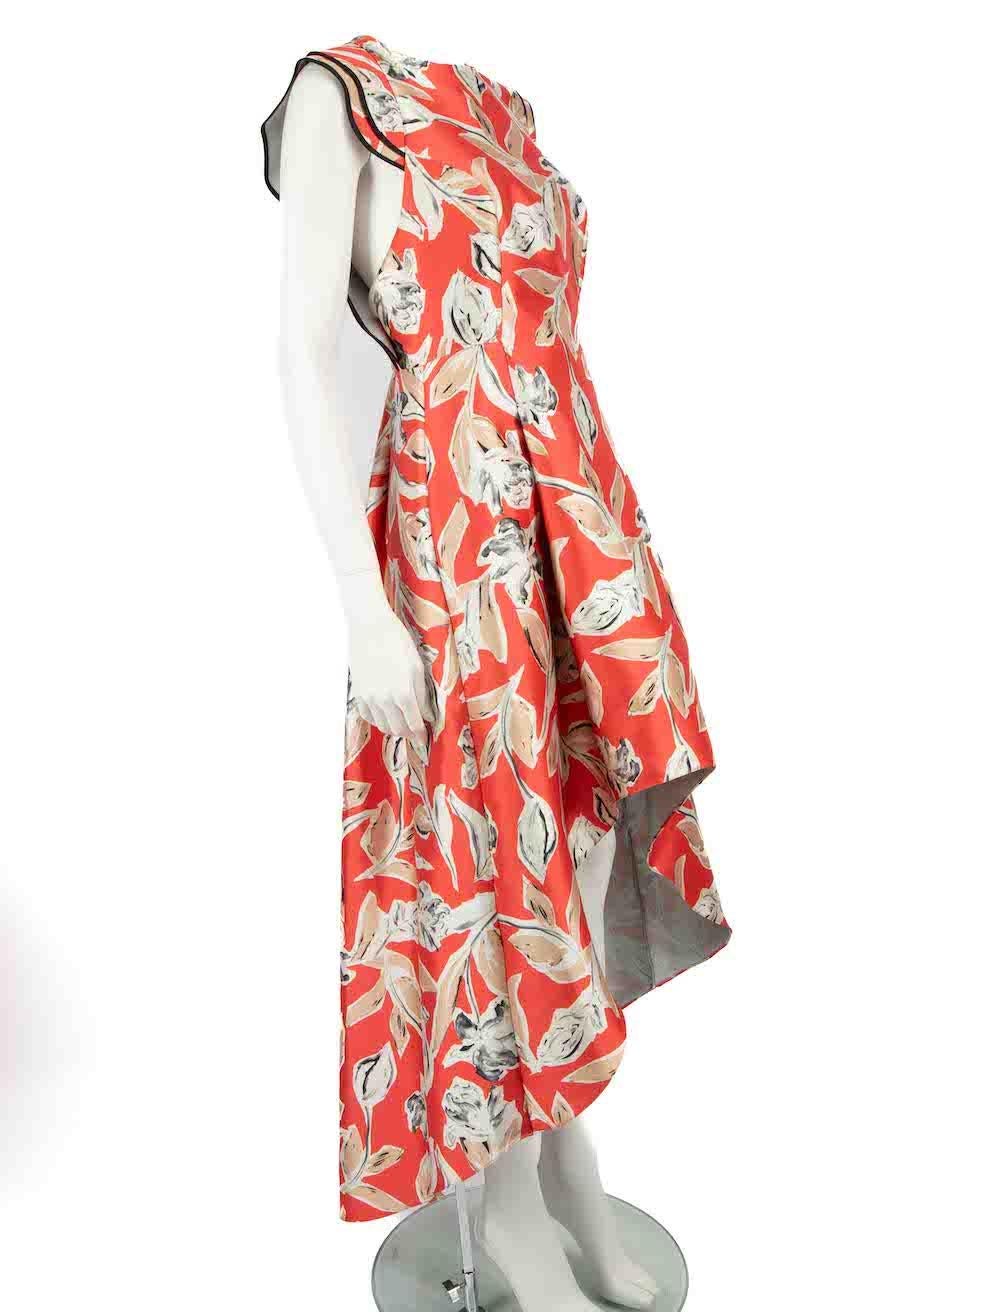 CONDITION is Good. General wear to dress is evident. Moderate signs of wear to front, back and lining with plucks to the weave and discoloured marks on this used Sachin & Babi designer resale item.
 
 
 
 Details
 
 
 Red
 
 Polyester
 
 Midi dress
